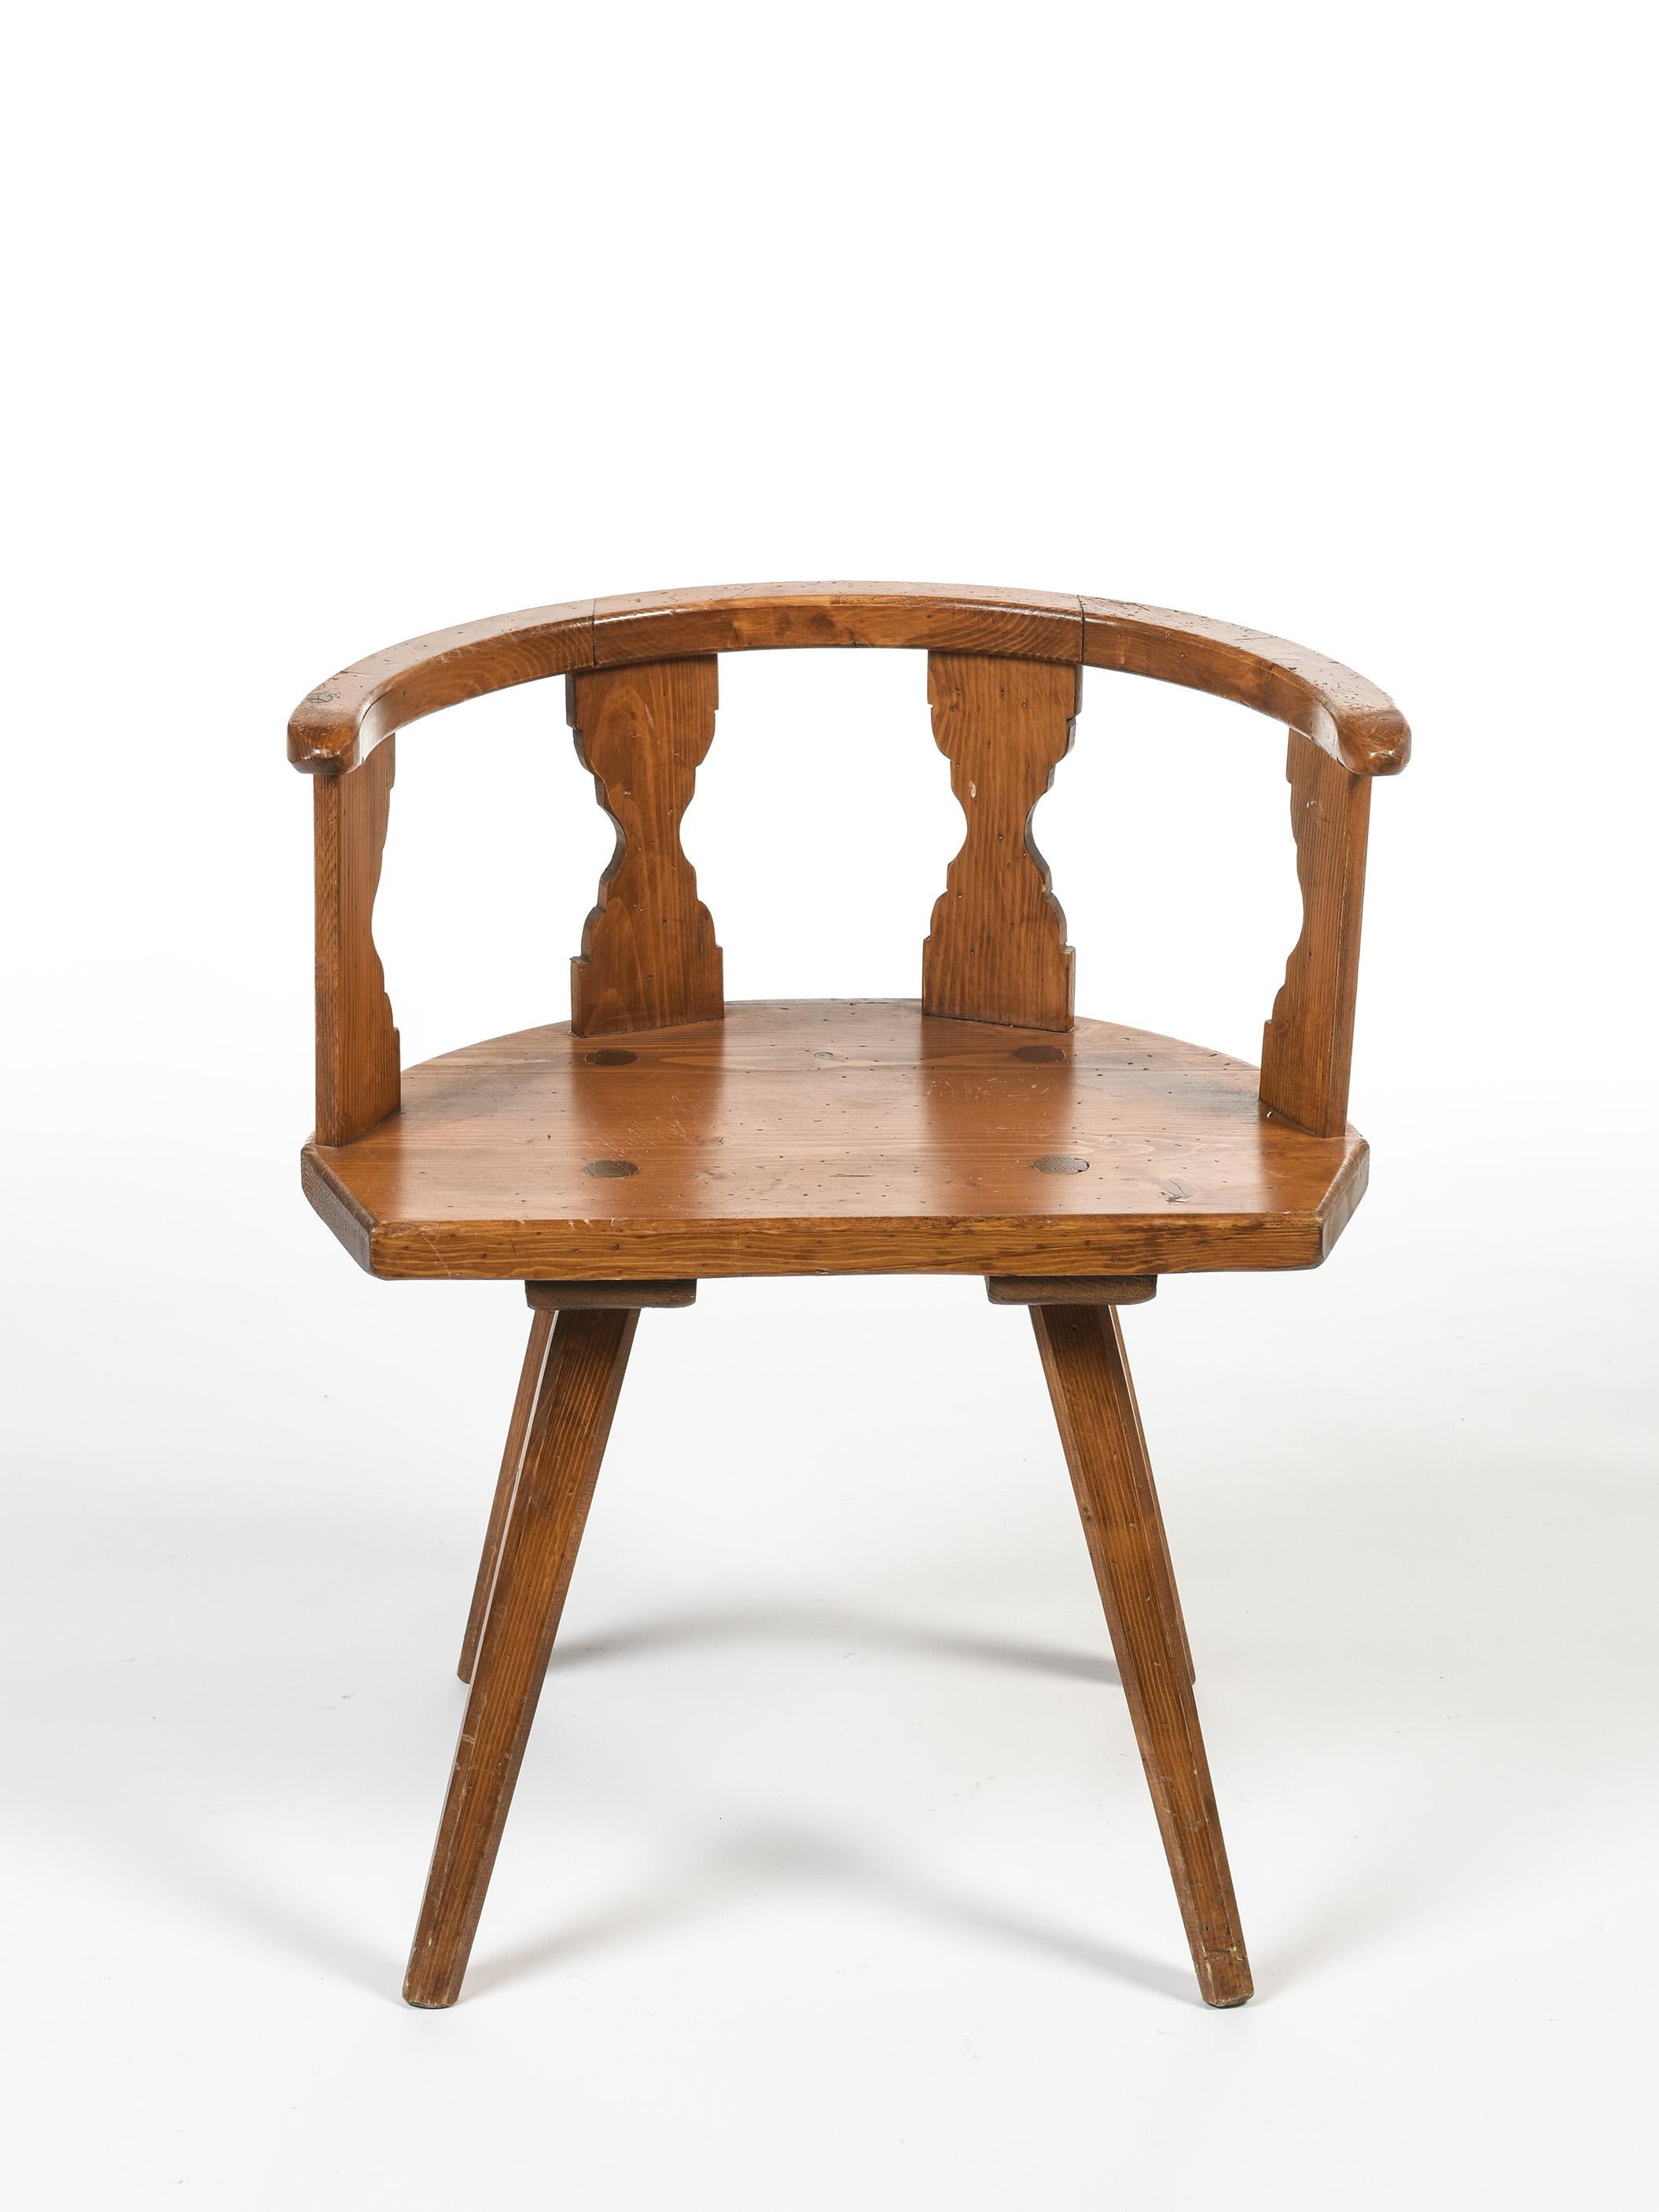 Set of four solid pine armchairs with traditional mortise and Tenon joint with curved openwork backrest.
This set is coming from and made for Les Airelles Palace in Courchevel, one of the most chic ski resort in the French Alps.

Measures: H 69